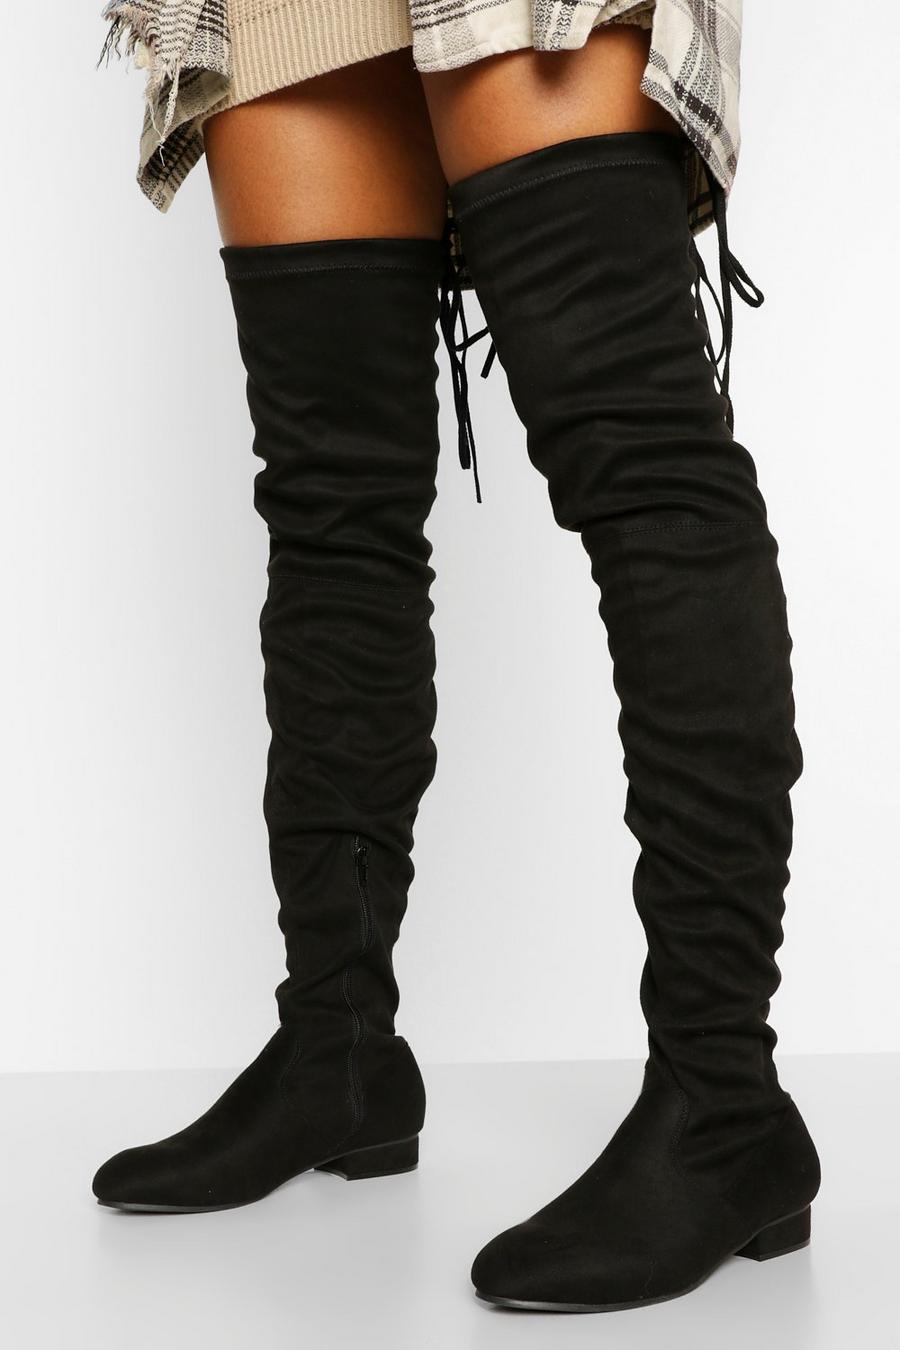 Boohoo Wide Width Pointed Toe Knee High Boot in Black Womens Shoes Boots Over-the-knee boots 